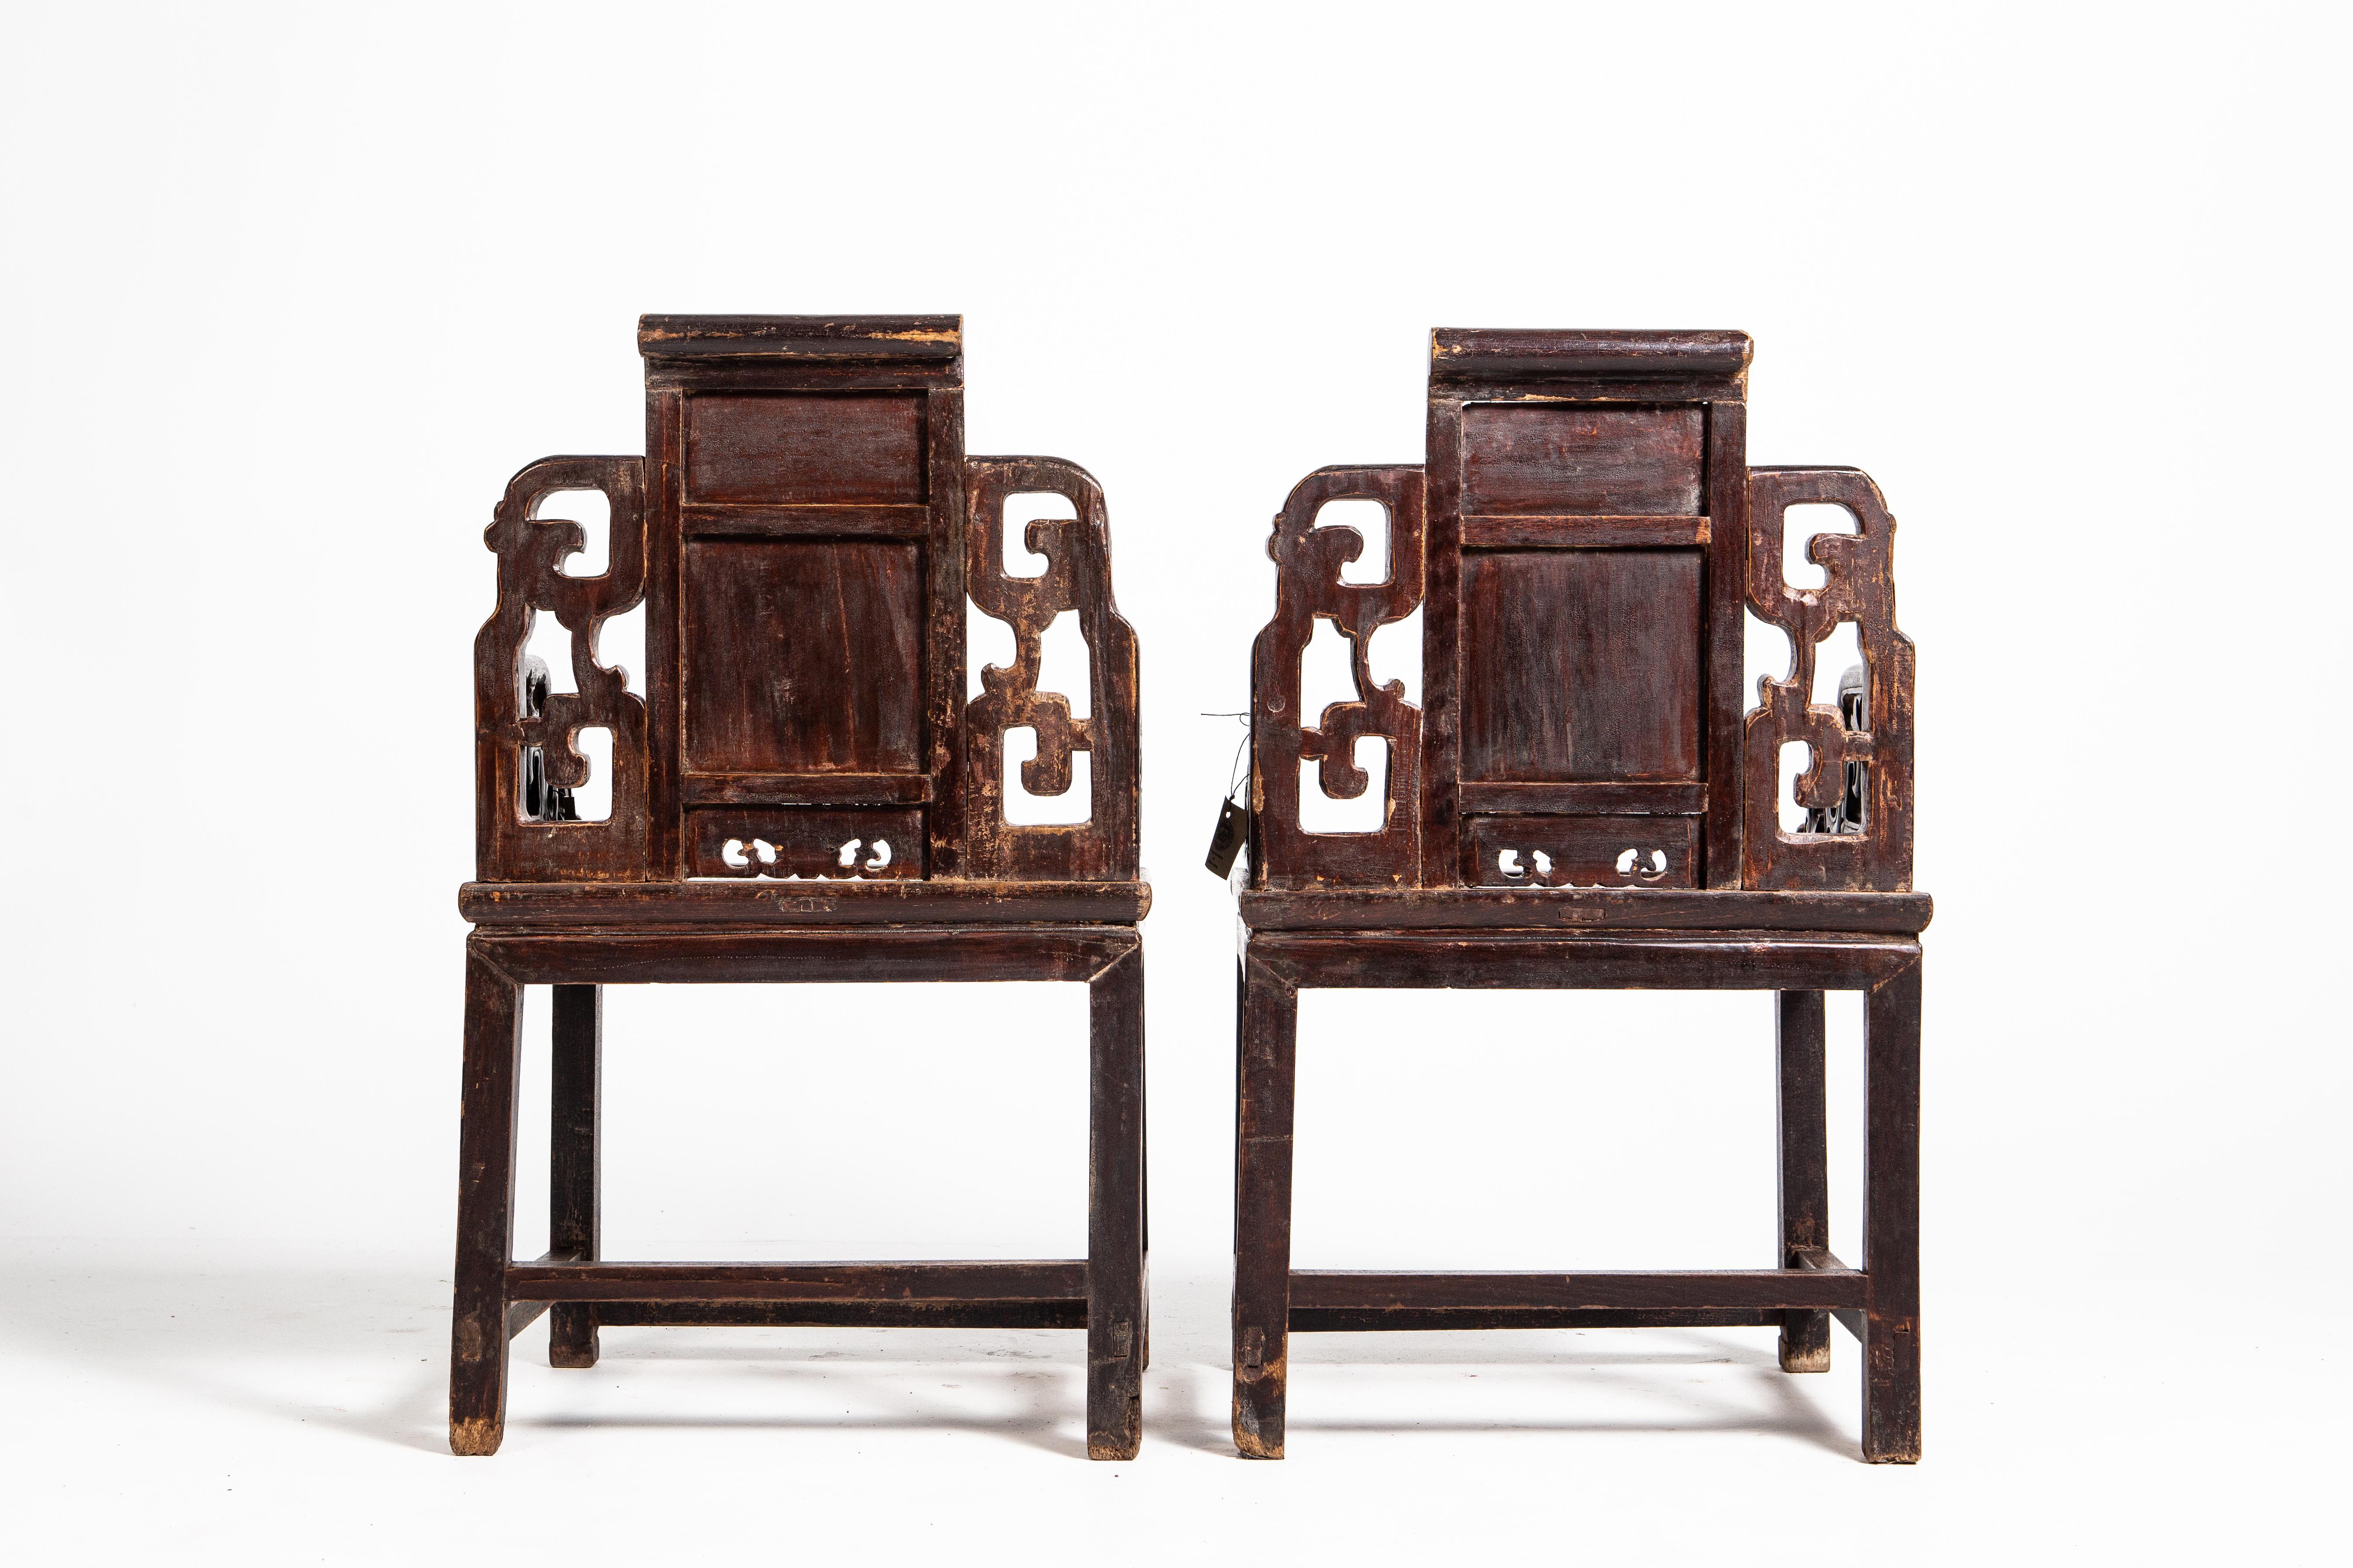 These handsome chairs feature floral carvings, delicate scroll-work on their apron and steeped arms. Made during the Qing Dynasty the chairs are made up of two parts: a waisted stool and an upper backrest that resembles a screen panel. Stout and